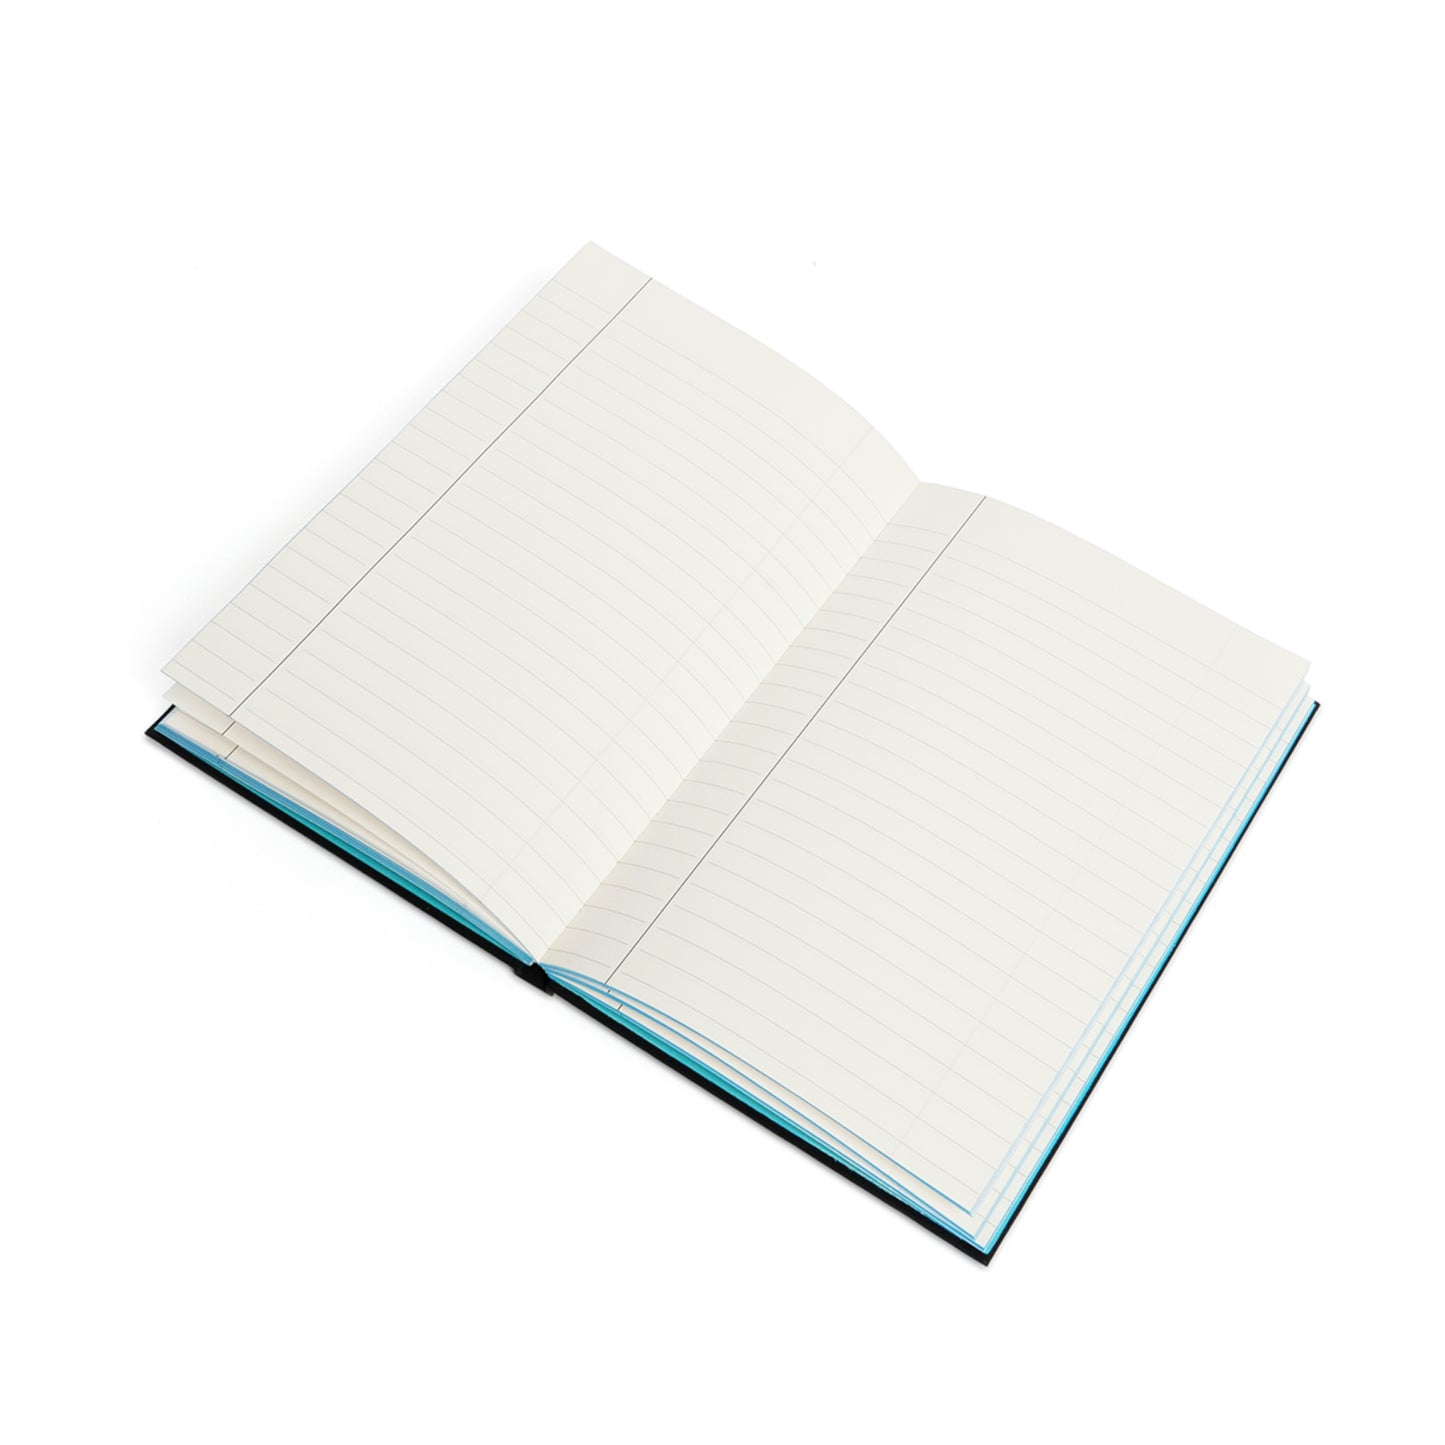 Tsalack Express Dads Color Contrast Notebook - Ruled